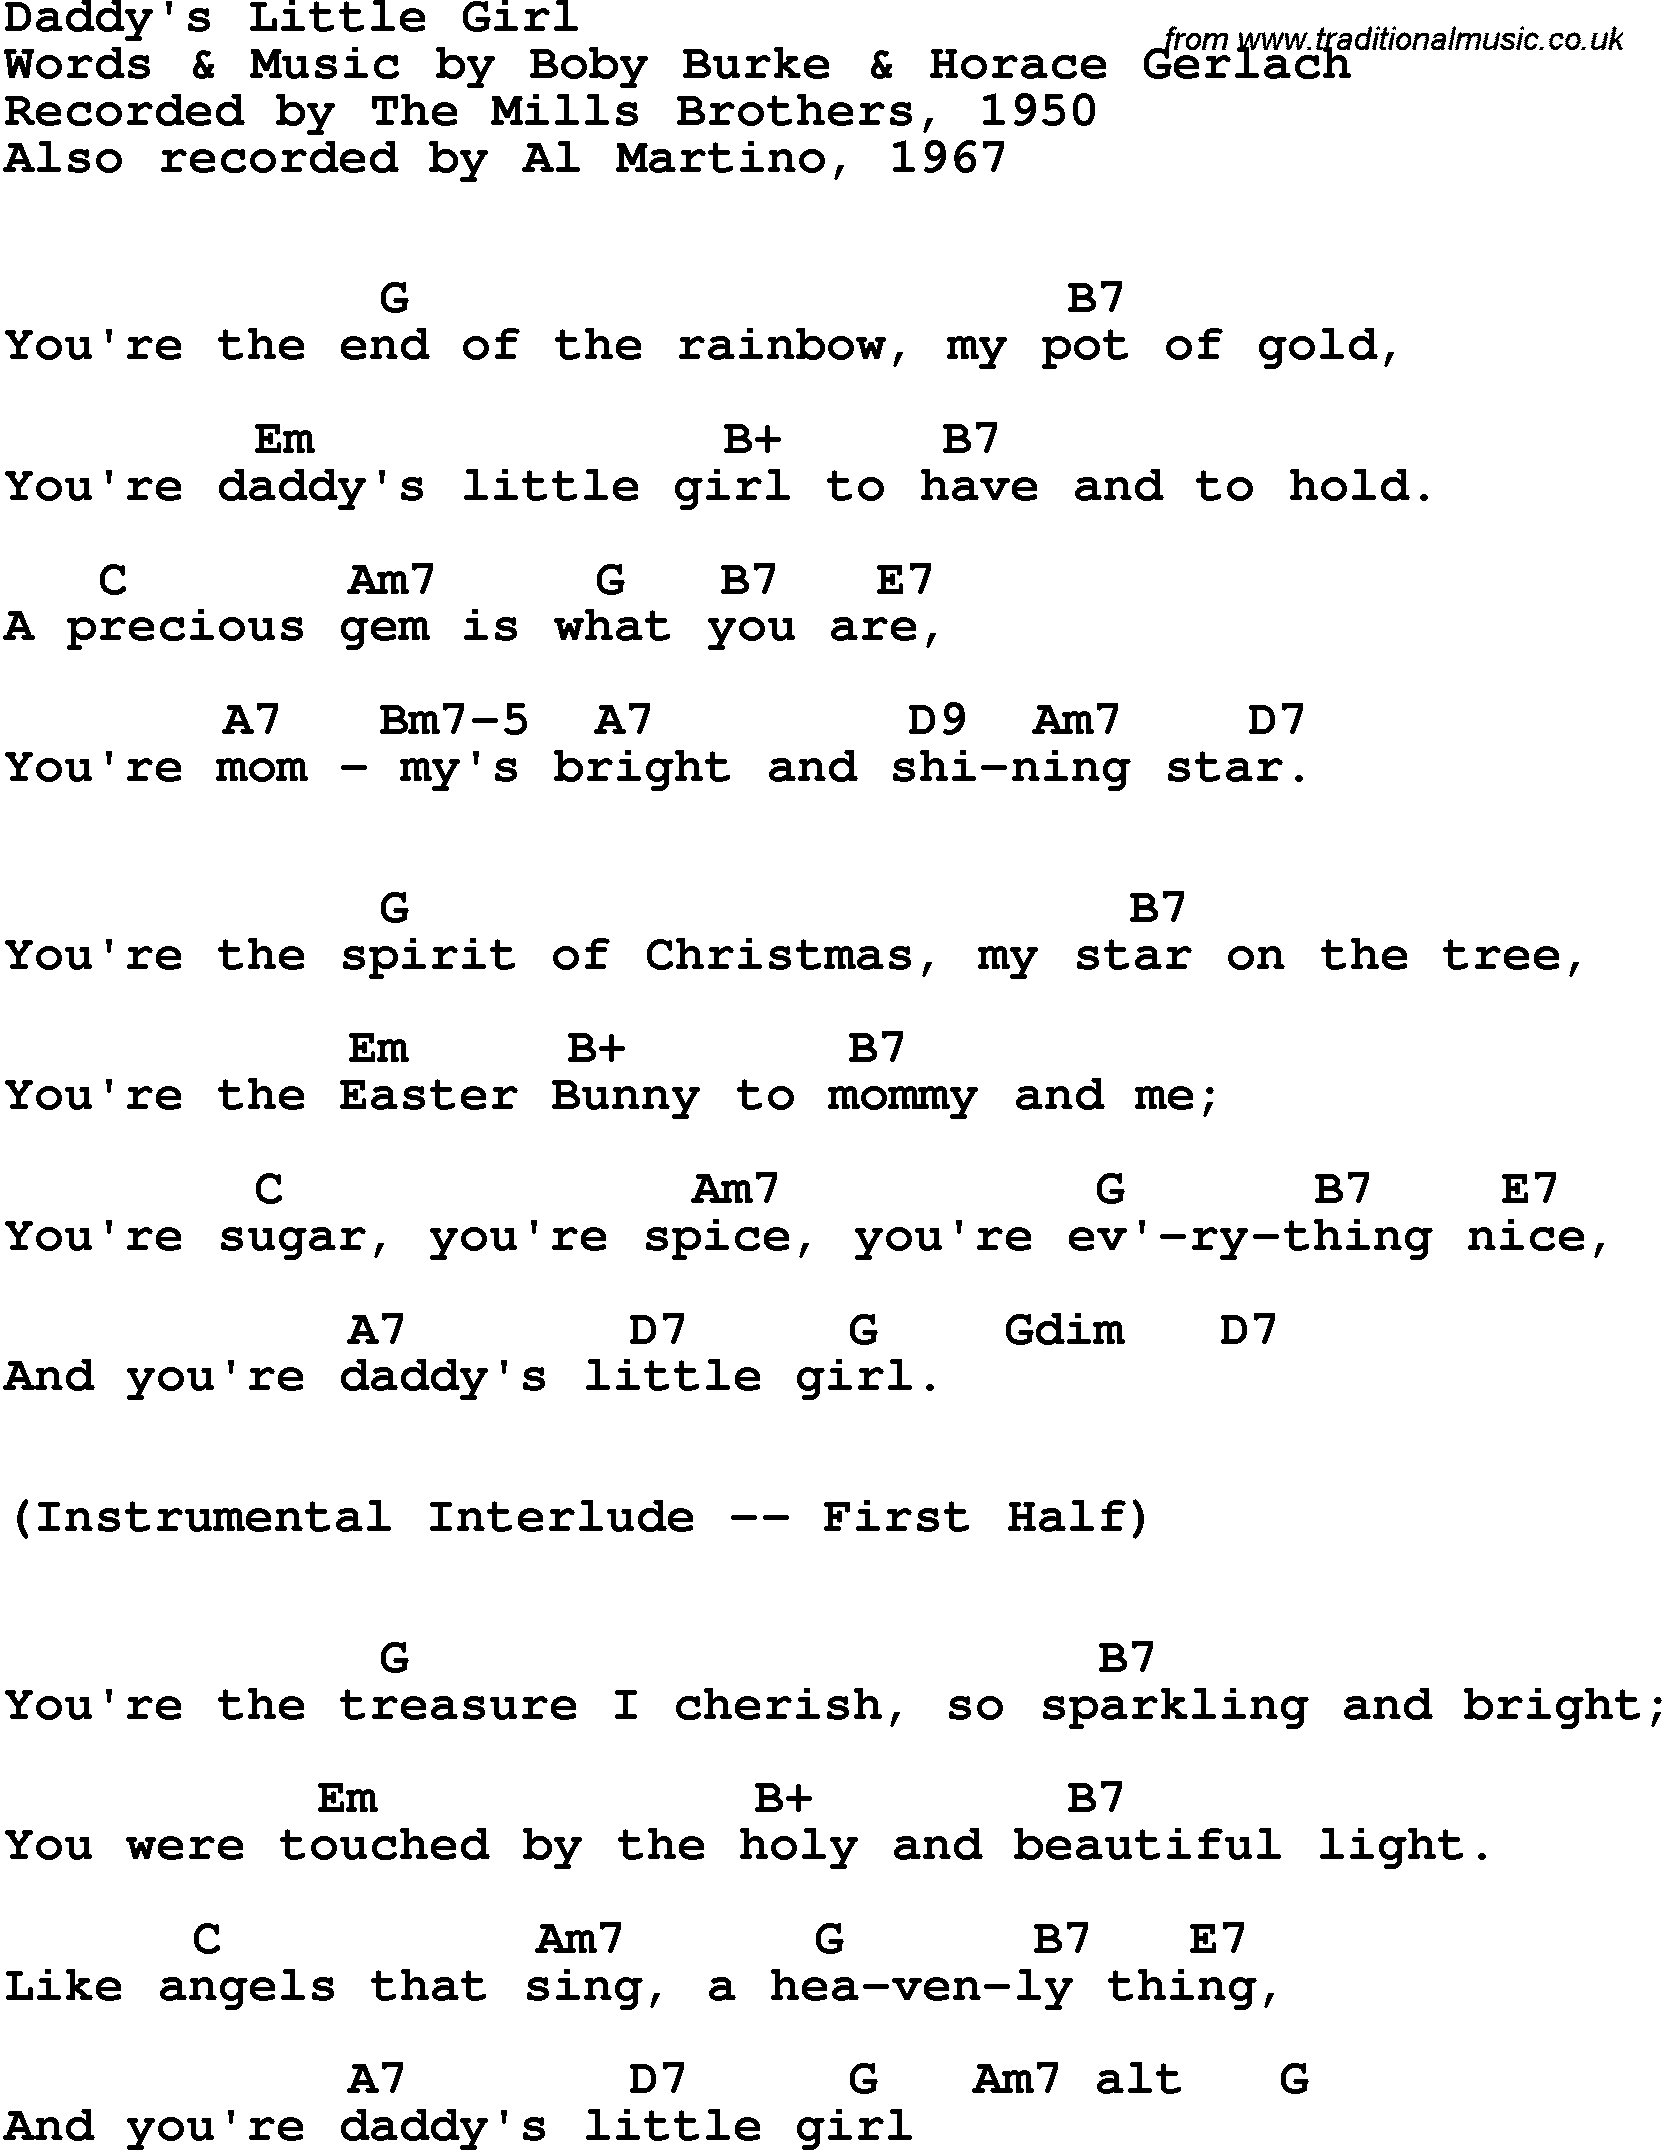 Song Lyrics with guitar chords for Daddy's Little Girl - The Mills Brothers, 1950